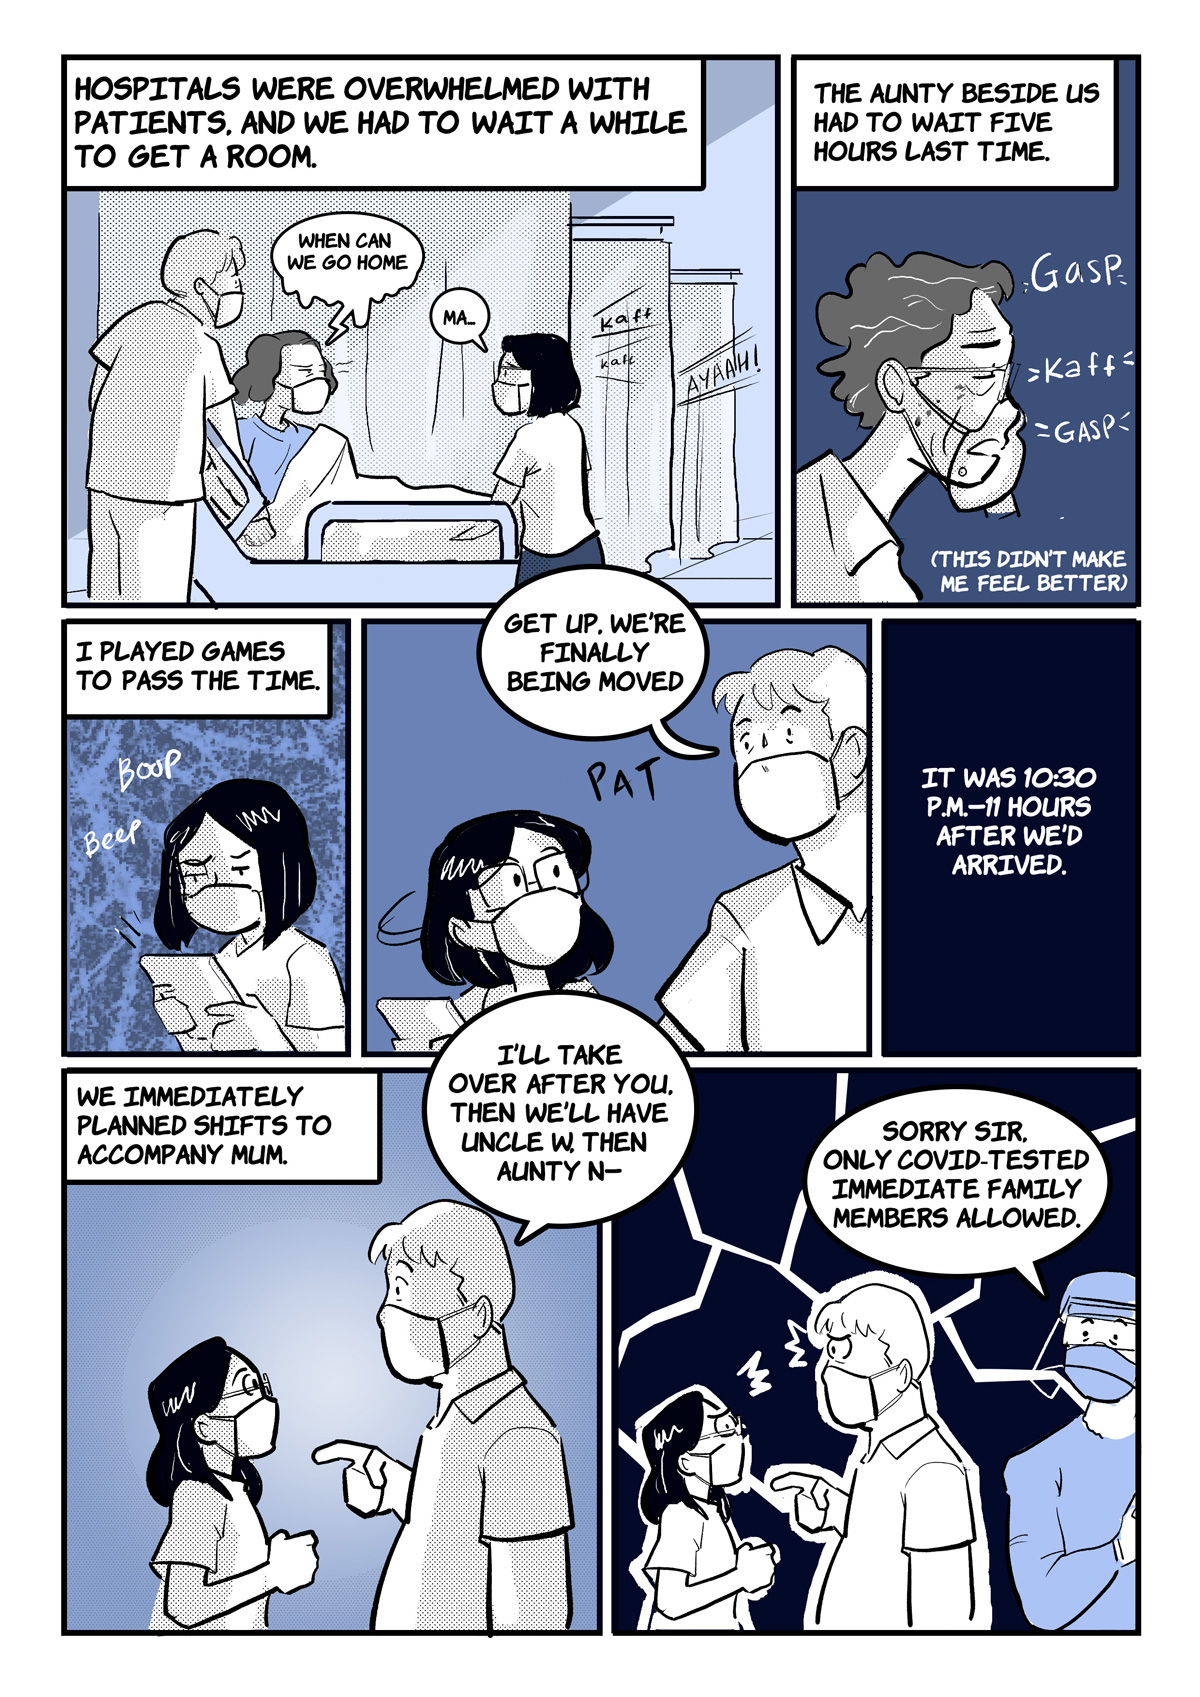 A comic page of 7 panels in black and various shades of blue and grey. The narration is provided in caption boxes.
Panel 1. Narrator: "Hospitals were overwhelmed with patients, and we had to wait a while to get a room." Stephani and her family wait in a corridor. "When can we go home?", asks her mother. Stephani isn't sure what to say.
Panel 2. Narrator: "The aunty beside us had to wait five hours last time. (This didn’t make me feel better)." An old woman coughs repeatedly into her fist.
Panel 3. Narrator: "I played games to pass the time." Stephani plays a mobile game on her phone.
Panel 4. Stephani's father pats her on the shoulder, saying "Get up, we’re finally being moved."
Panel 5. Narrator: "It was 10:30 p.m.—11 hours after we’d arrived."
Panel 6. Narrator: "We immediately planned shifts to accompany mum." Stephani's father says to her, "I’ll take over after you, then we’ll have Uncle W, then Aunty N—"
Panel 7. They're approached by a nurse, who says, "Sorry sir, only COVID-tested immediate family members allowed." Stephani and her father look at each other in dismay. 